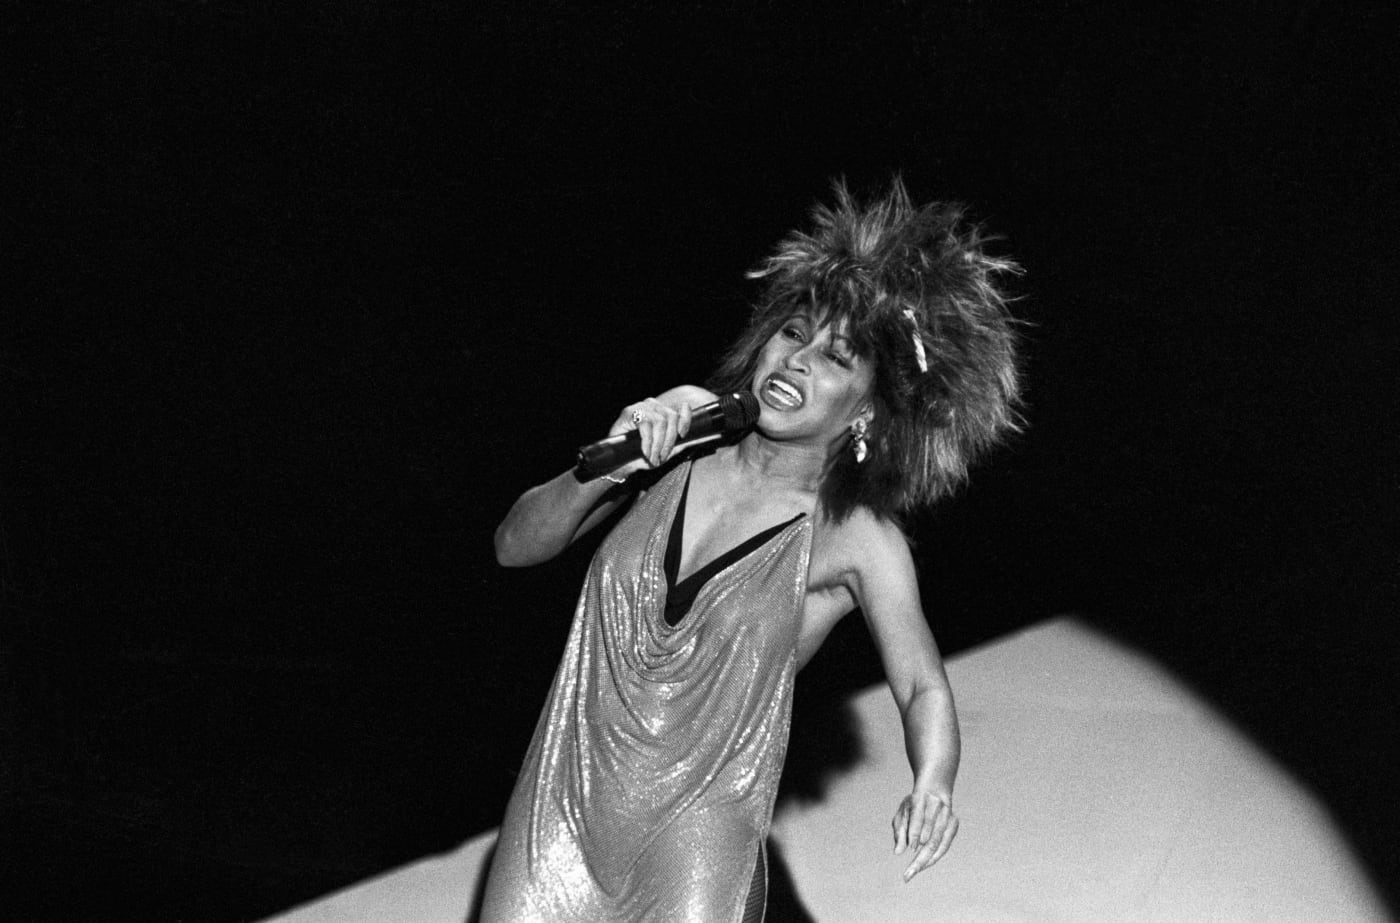 Black and white photo of Tina Turner in shiny dress passionately singing into microphone